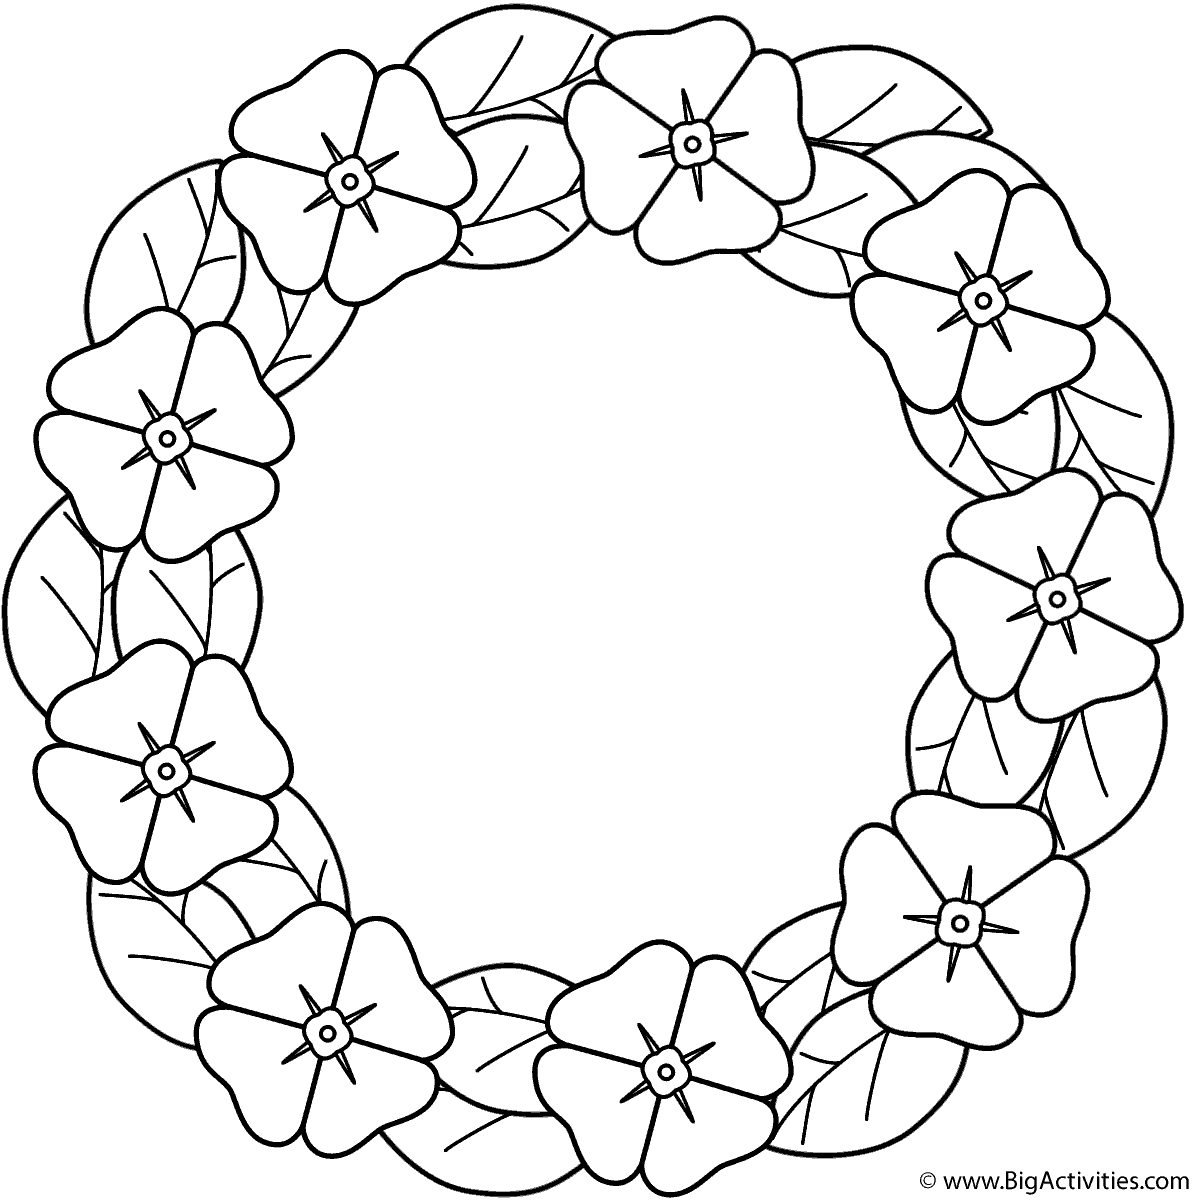 Download Poppy wreath - Coloring Page (Anzac Day)